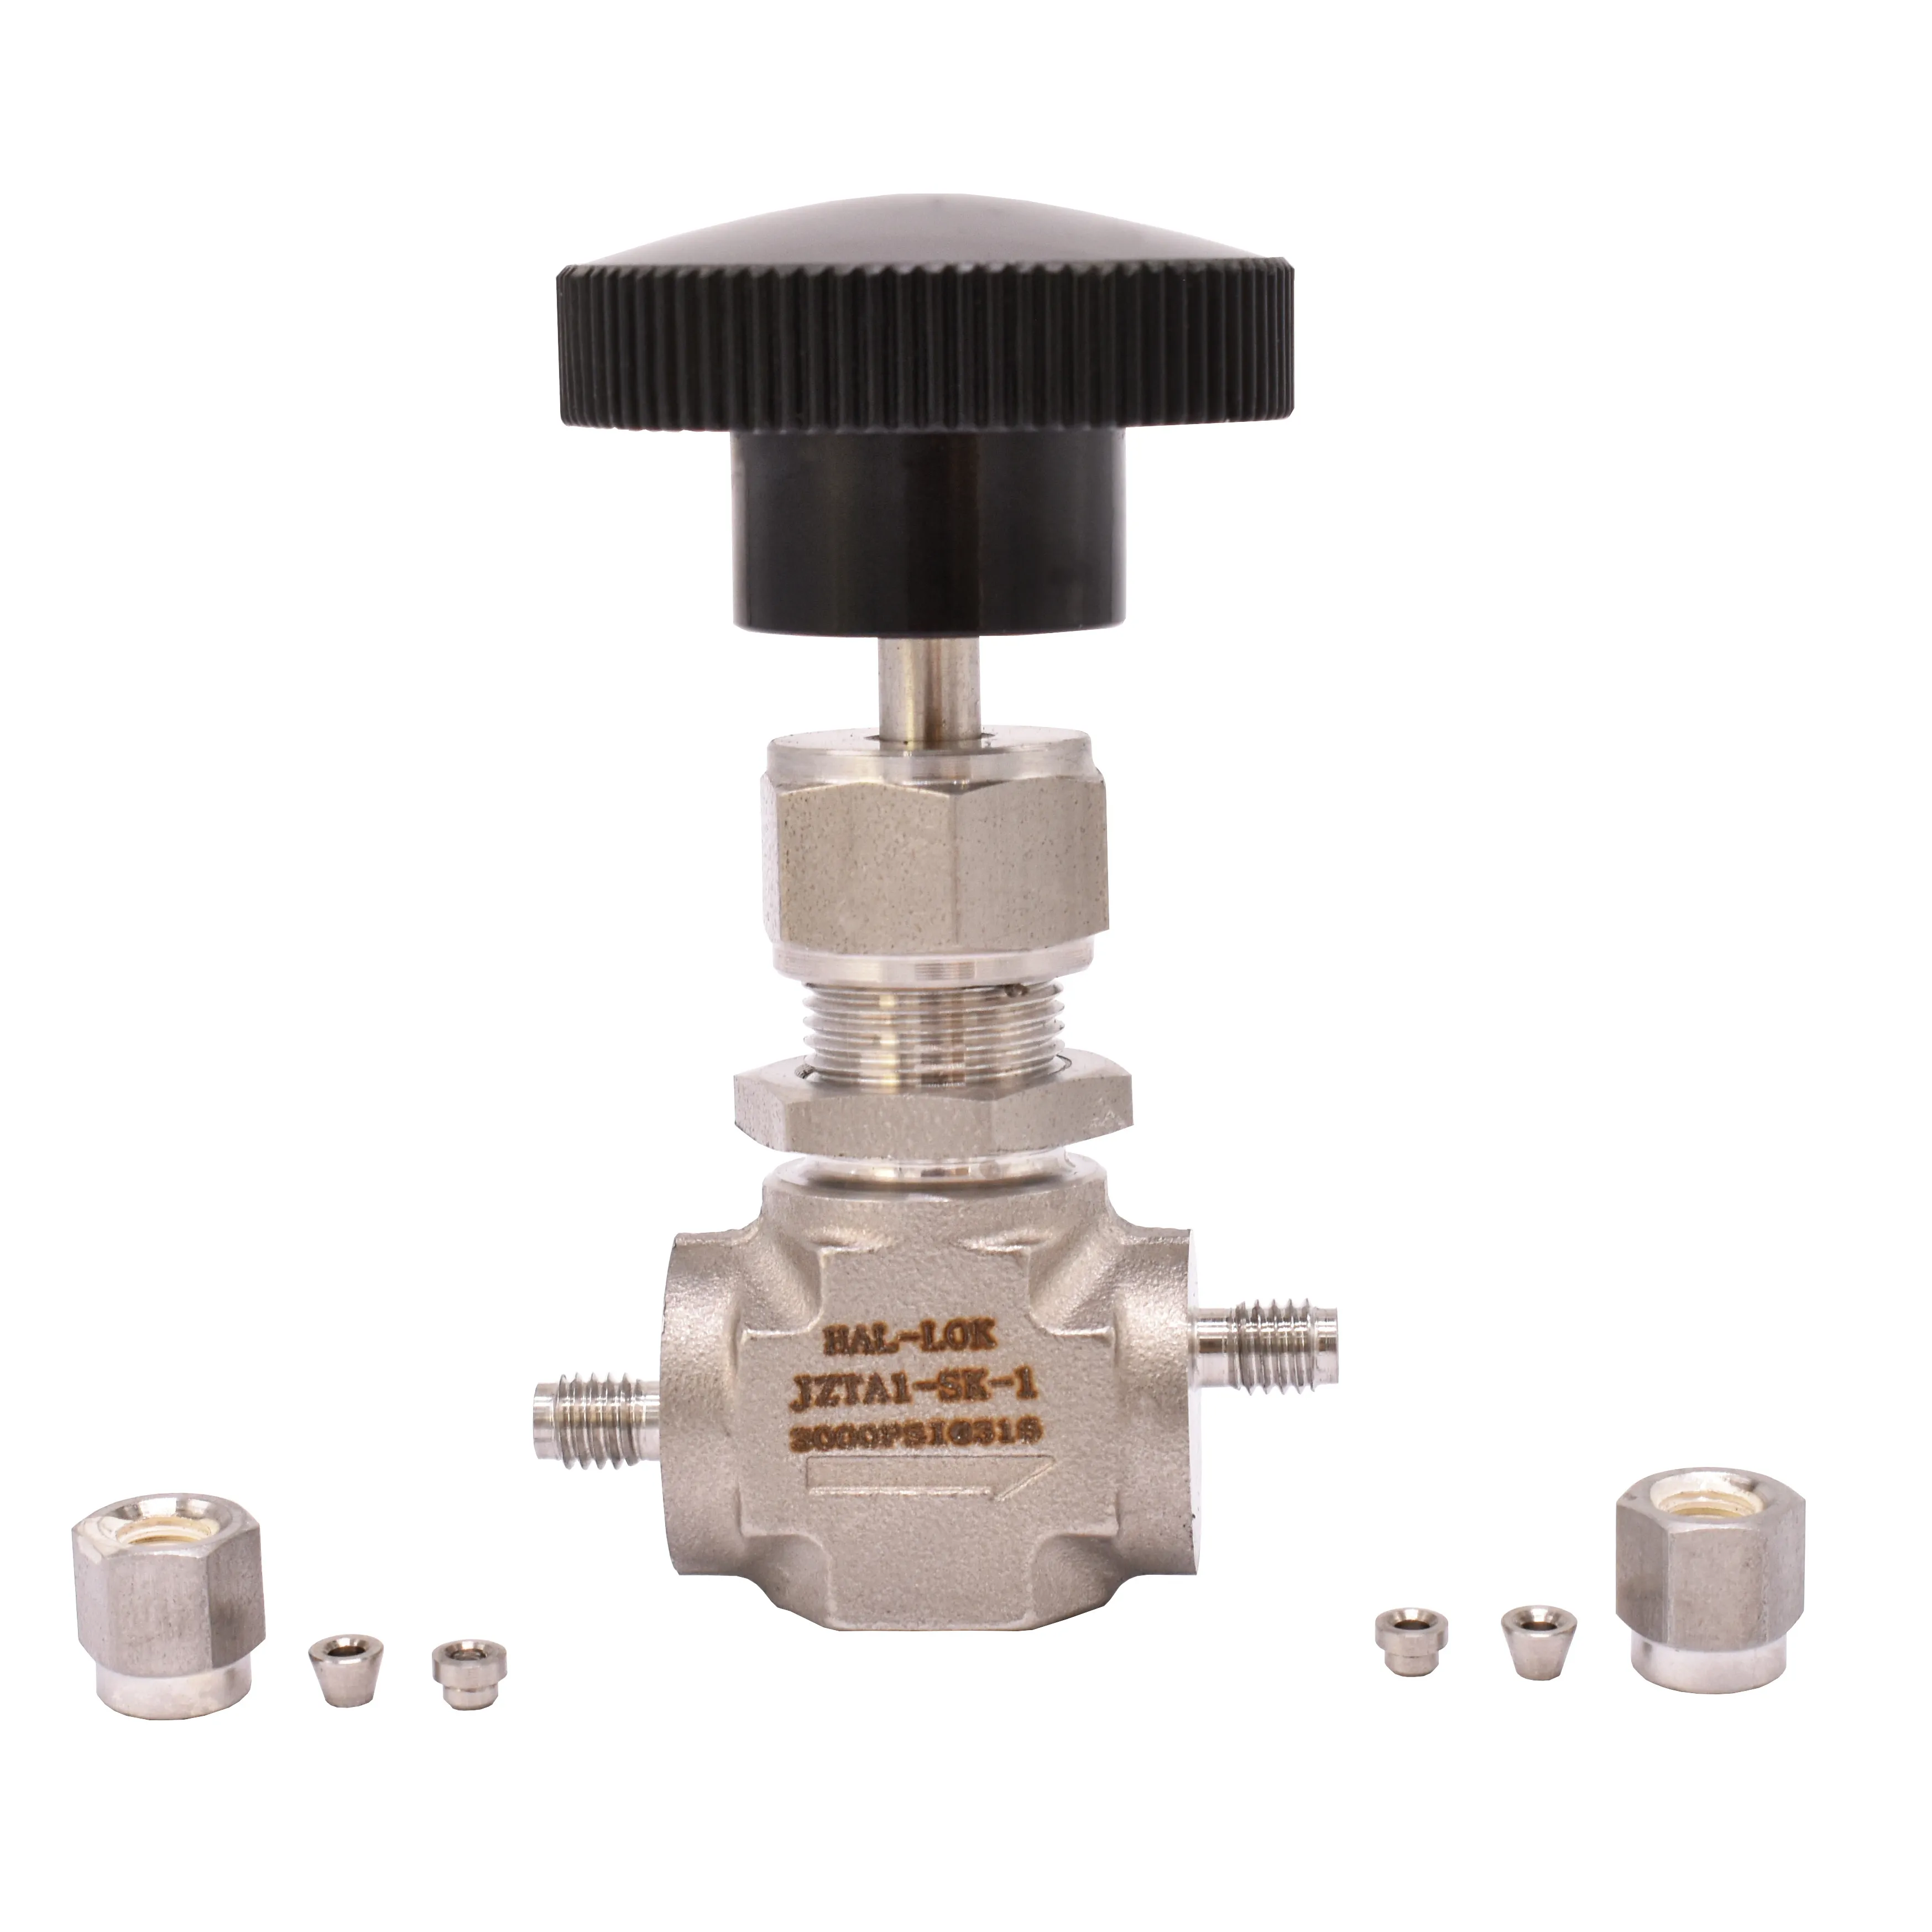 Integral Bonnet Forged Stainless steel 316L Needle Valves Double Ferrules Needle Valve